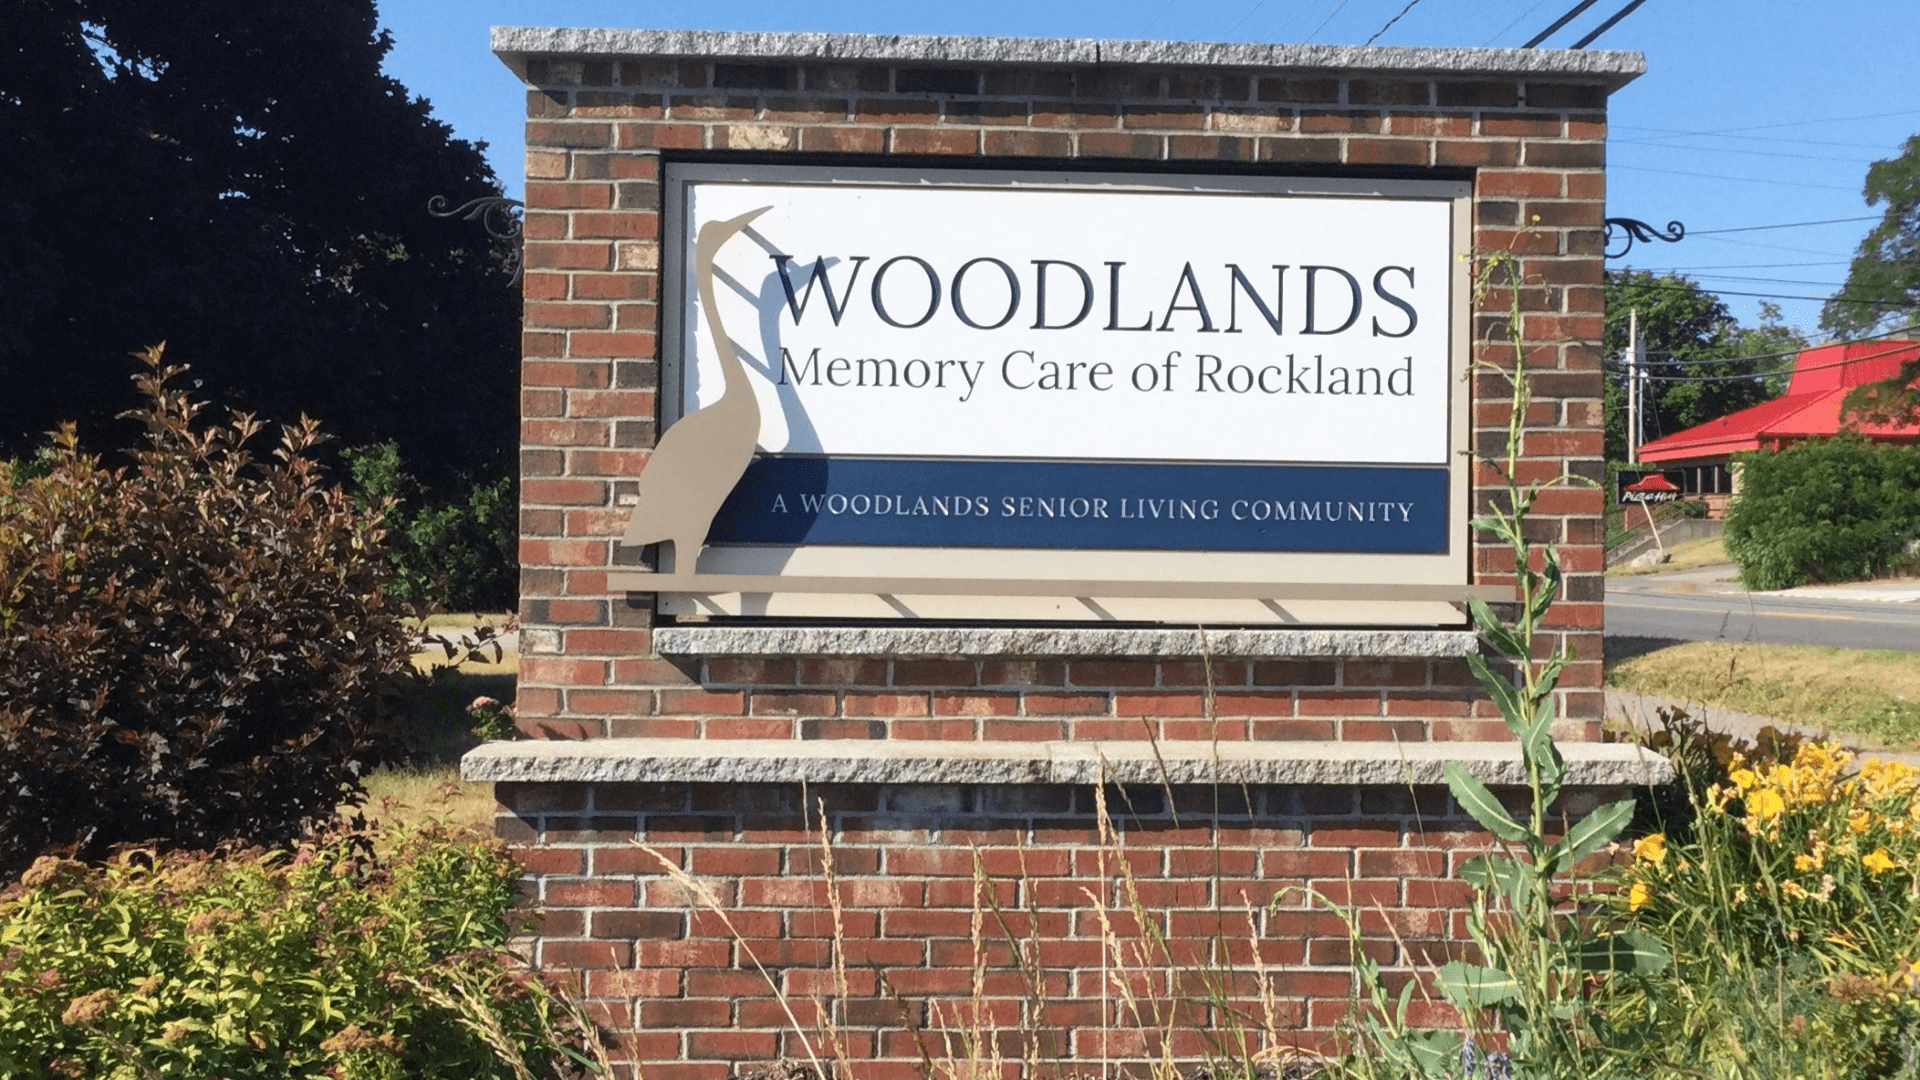 Rockland long-term care facility resident died after being found in the snow